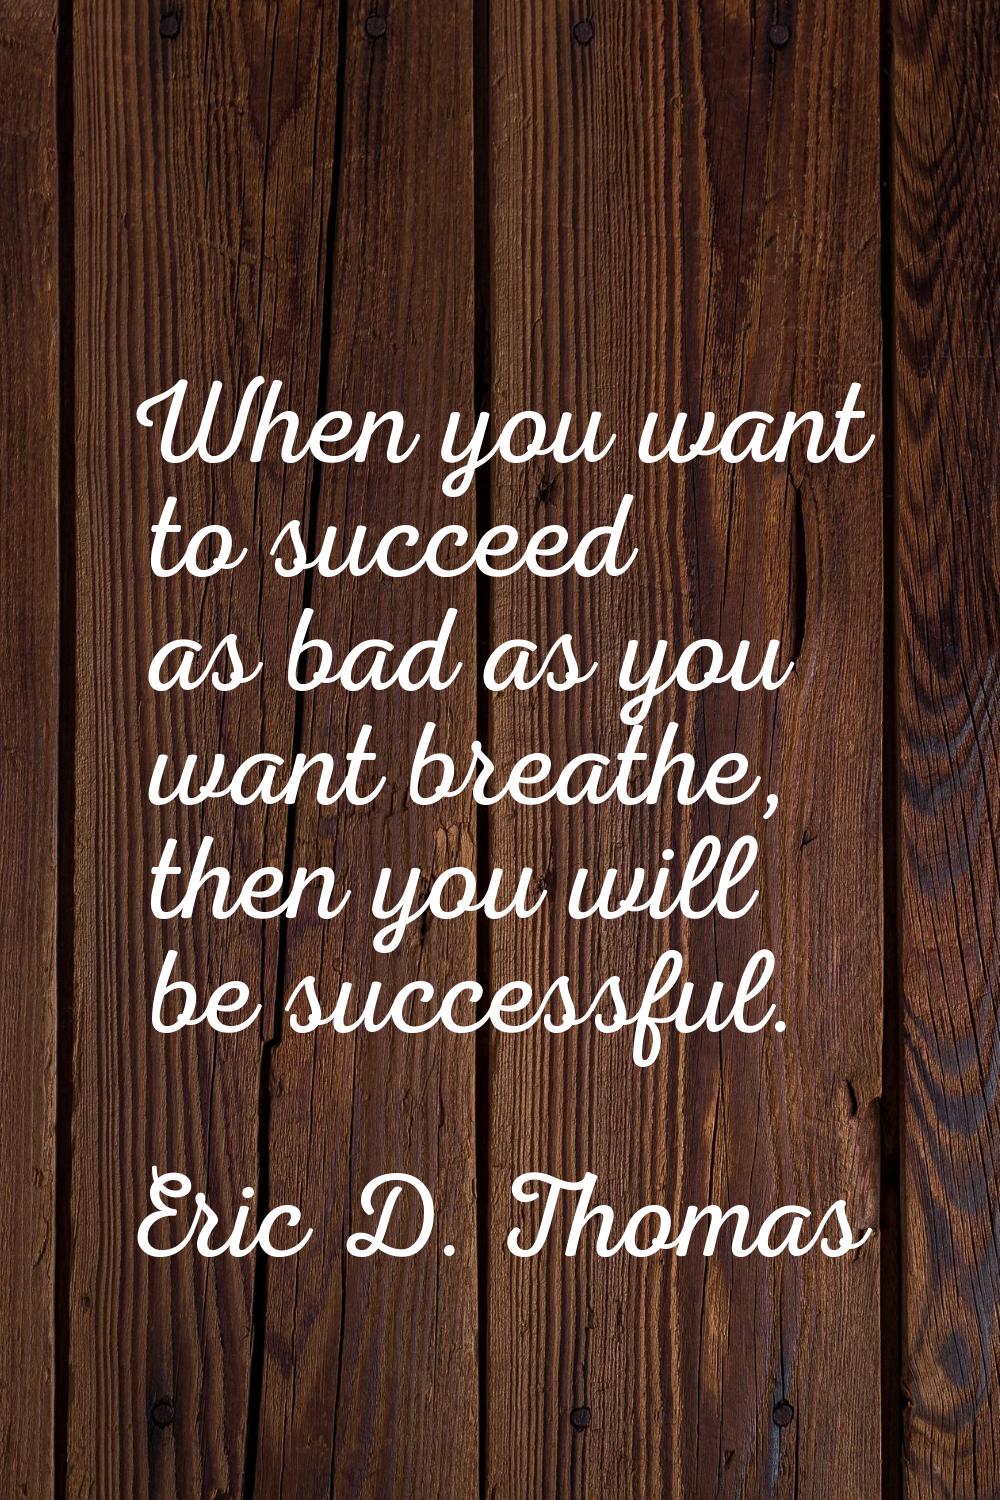 When you want to succeed as bad as you want breathe, then you will be successful.